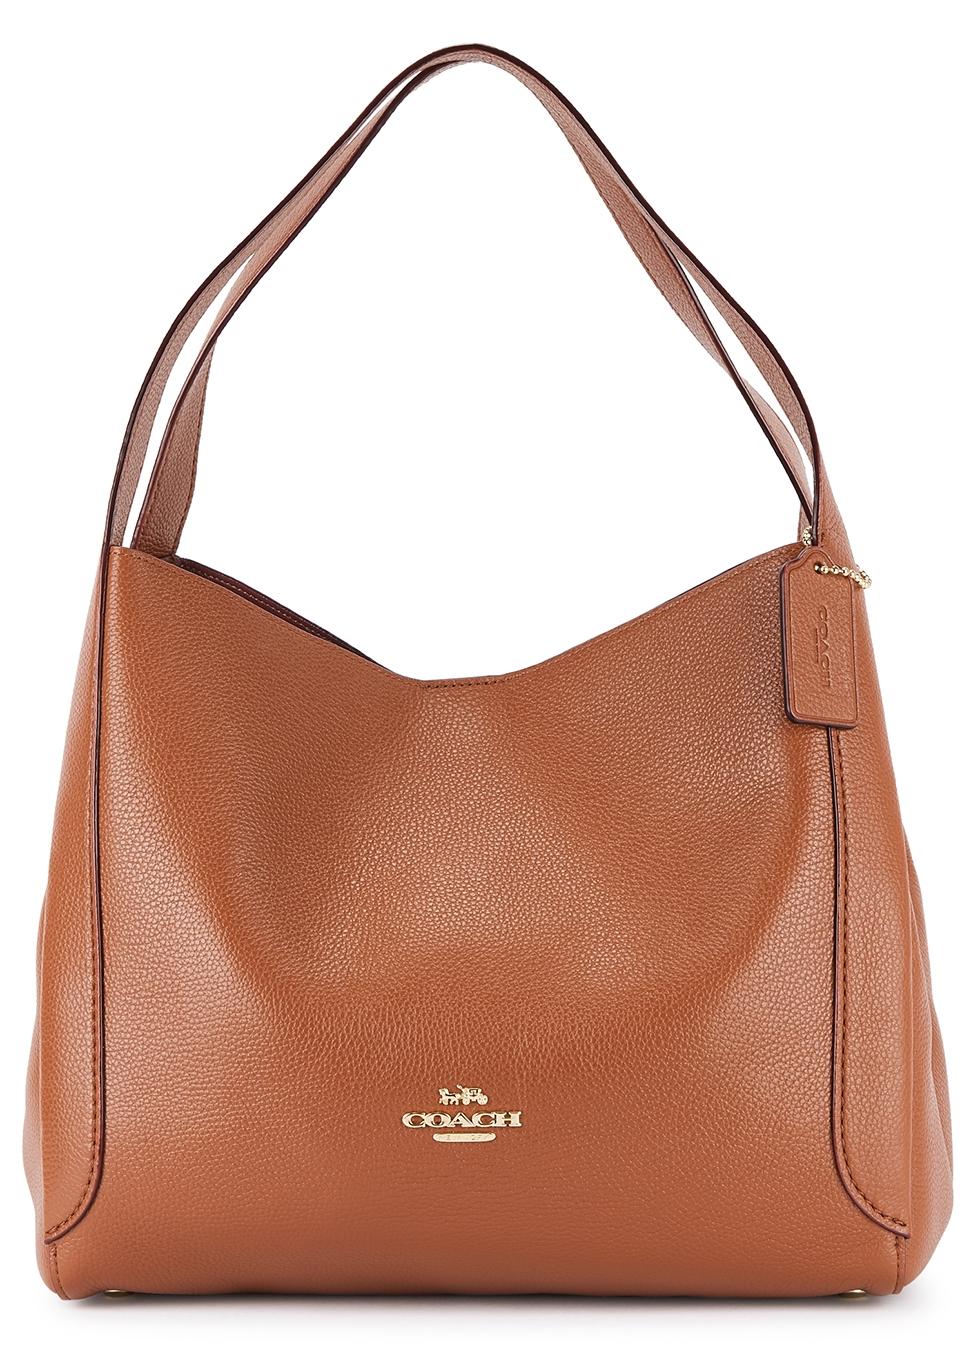 COACH Polished Pebble Leather Hadley Hobo Gd/1941 Saddle in Brown